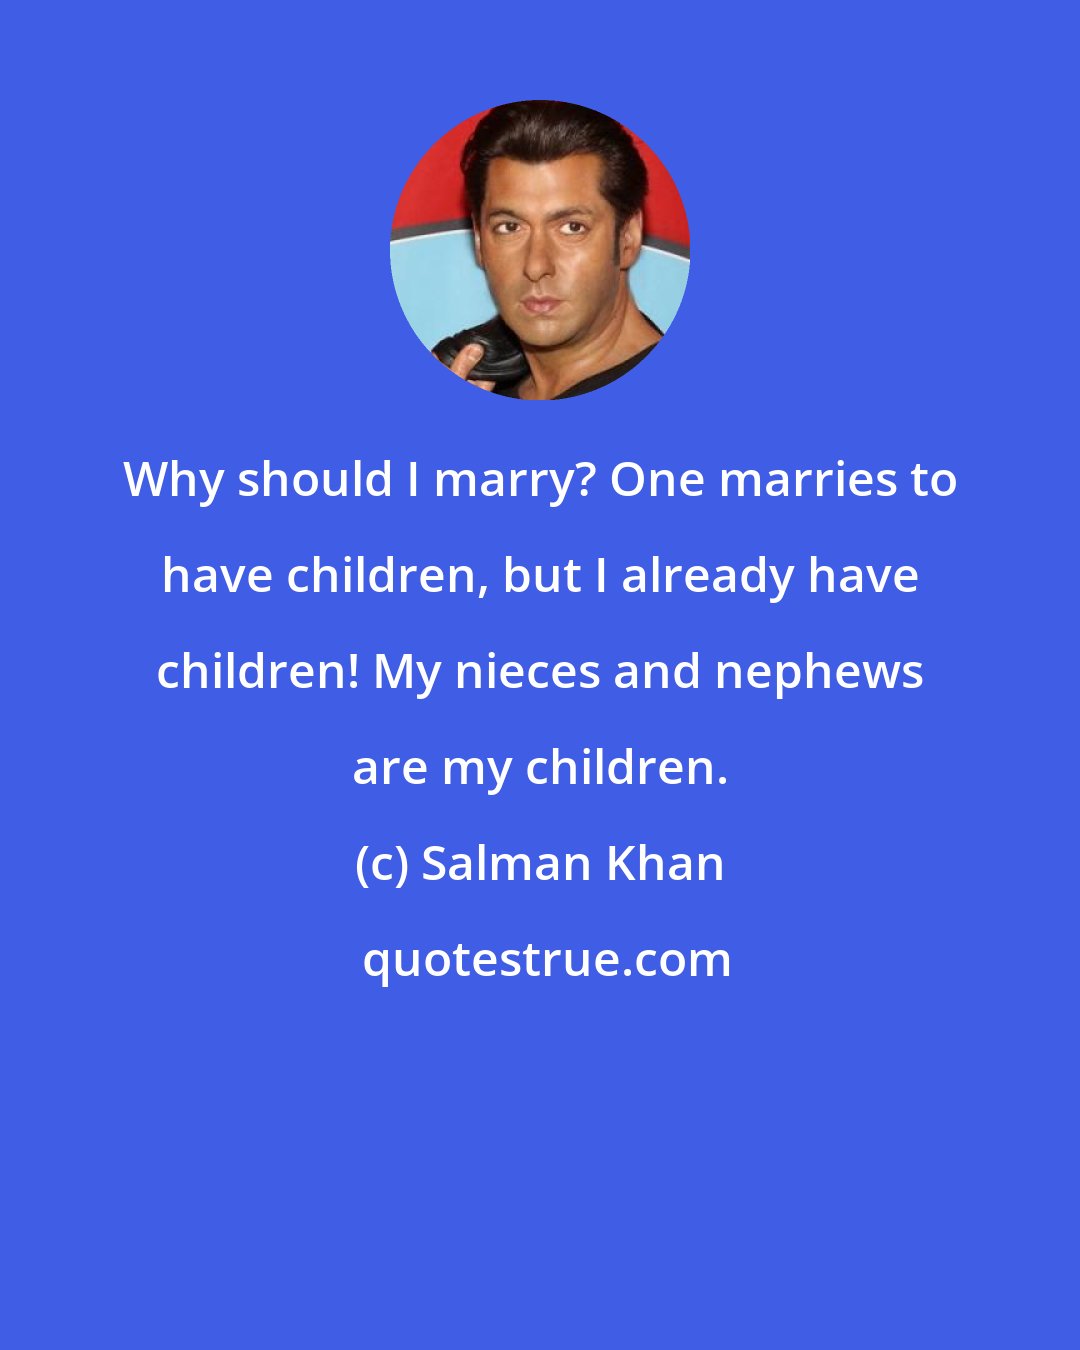 Salman Khan: Why should I marry? One marries to have children, but I already have children! My nieces and nephews are my children.